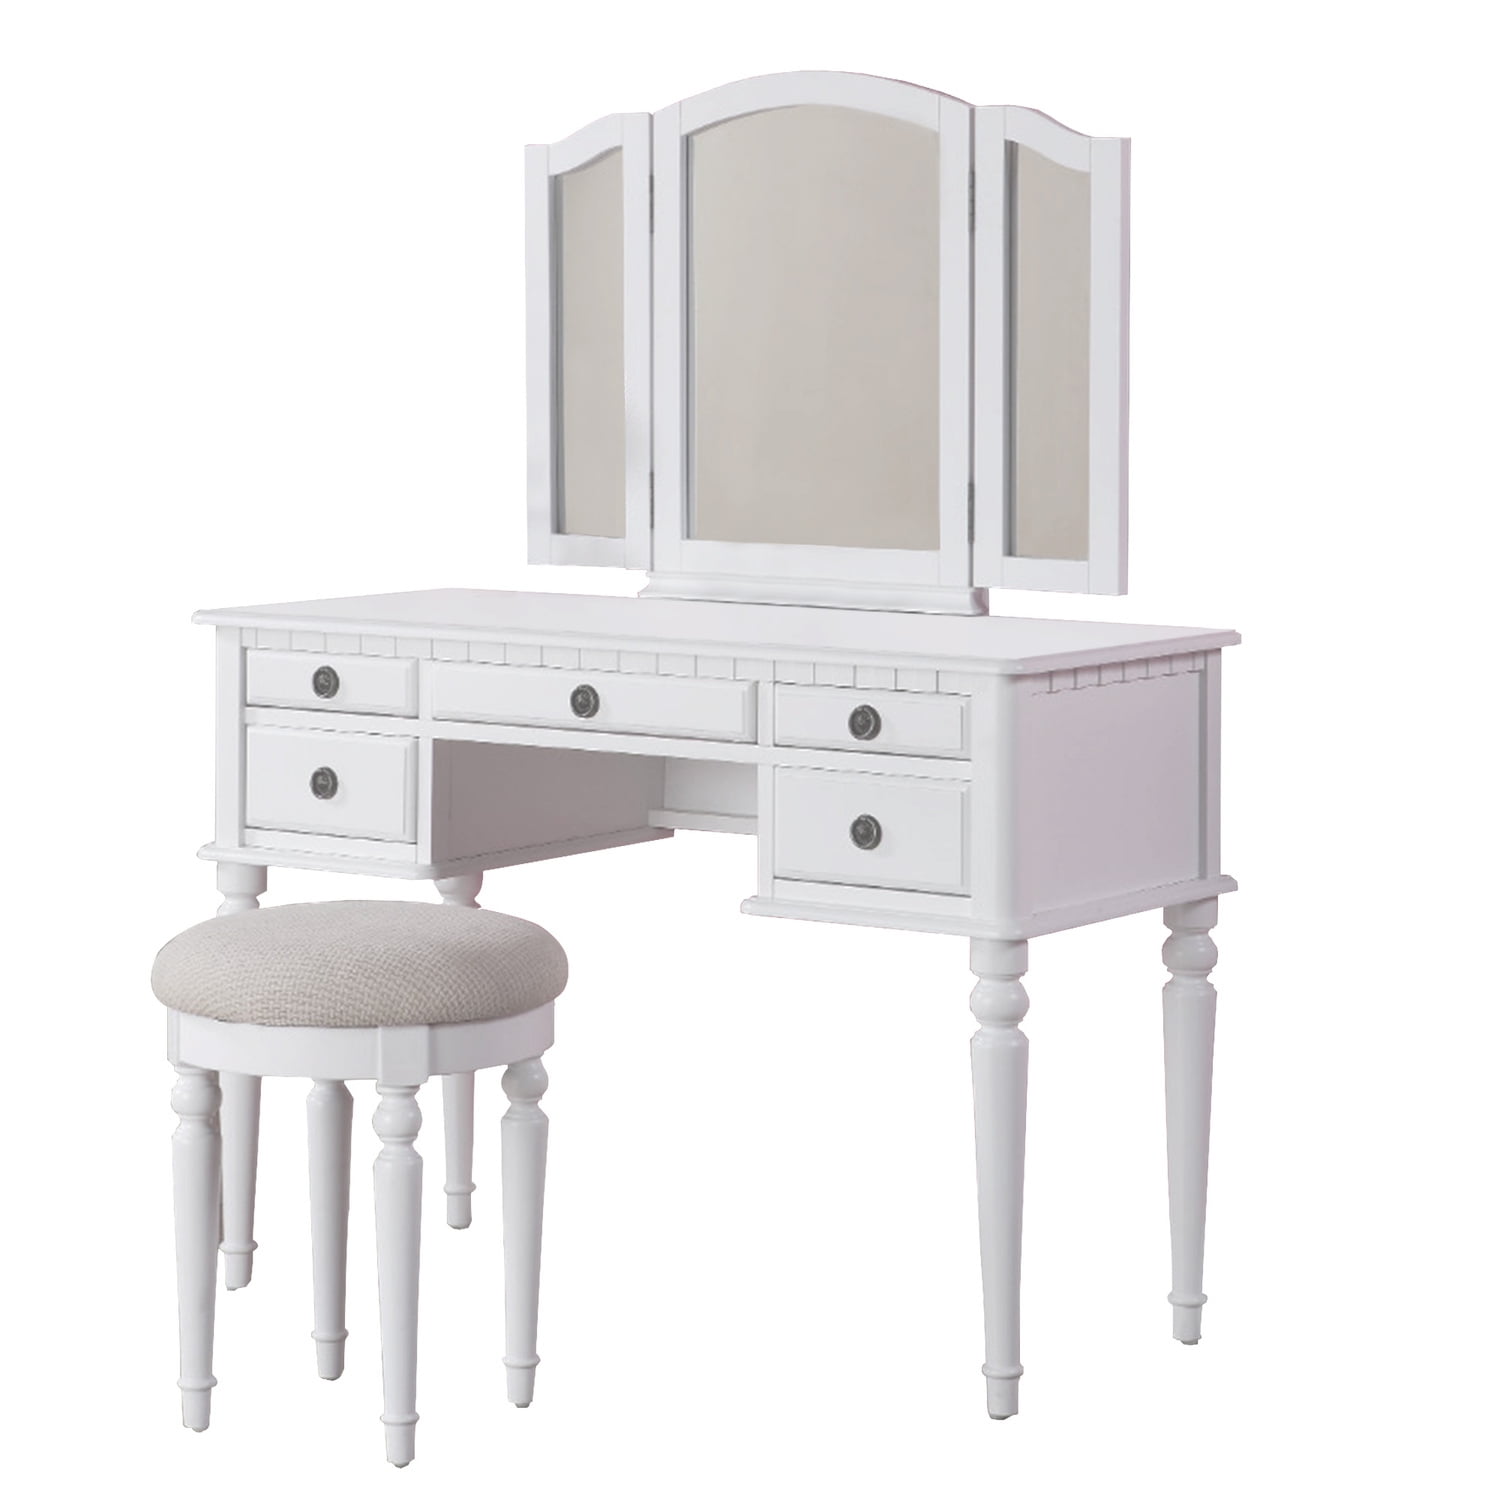 Picture of Benzara BM171346 54 x 43 x 19 in. Wooden Vanity Set with Stool - White